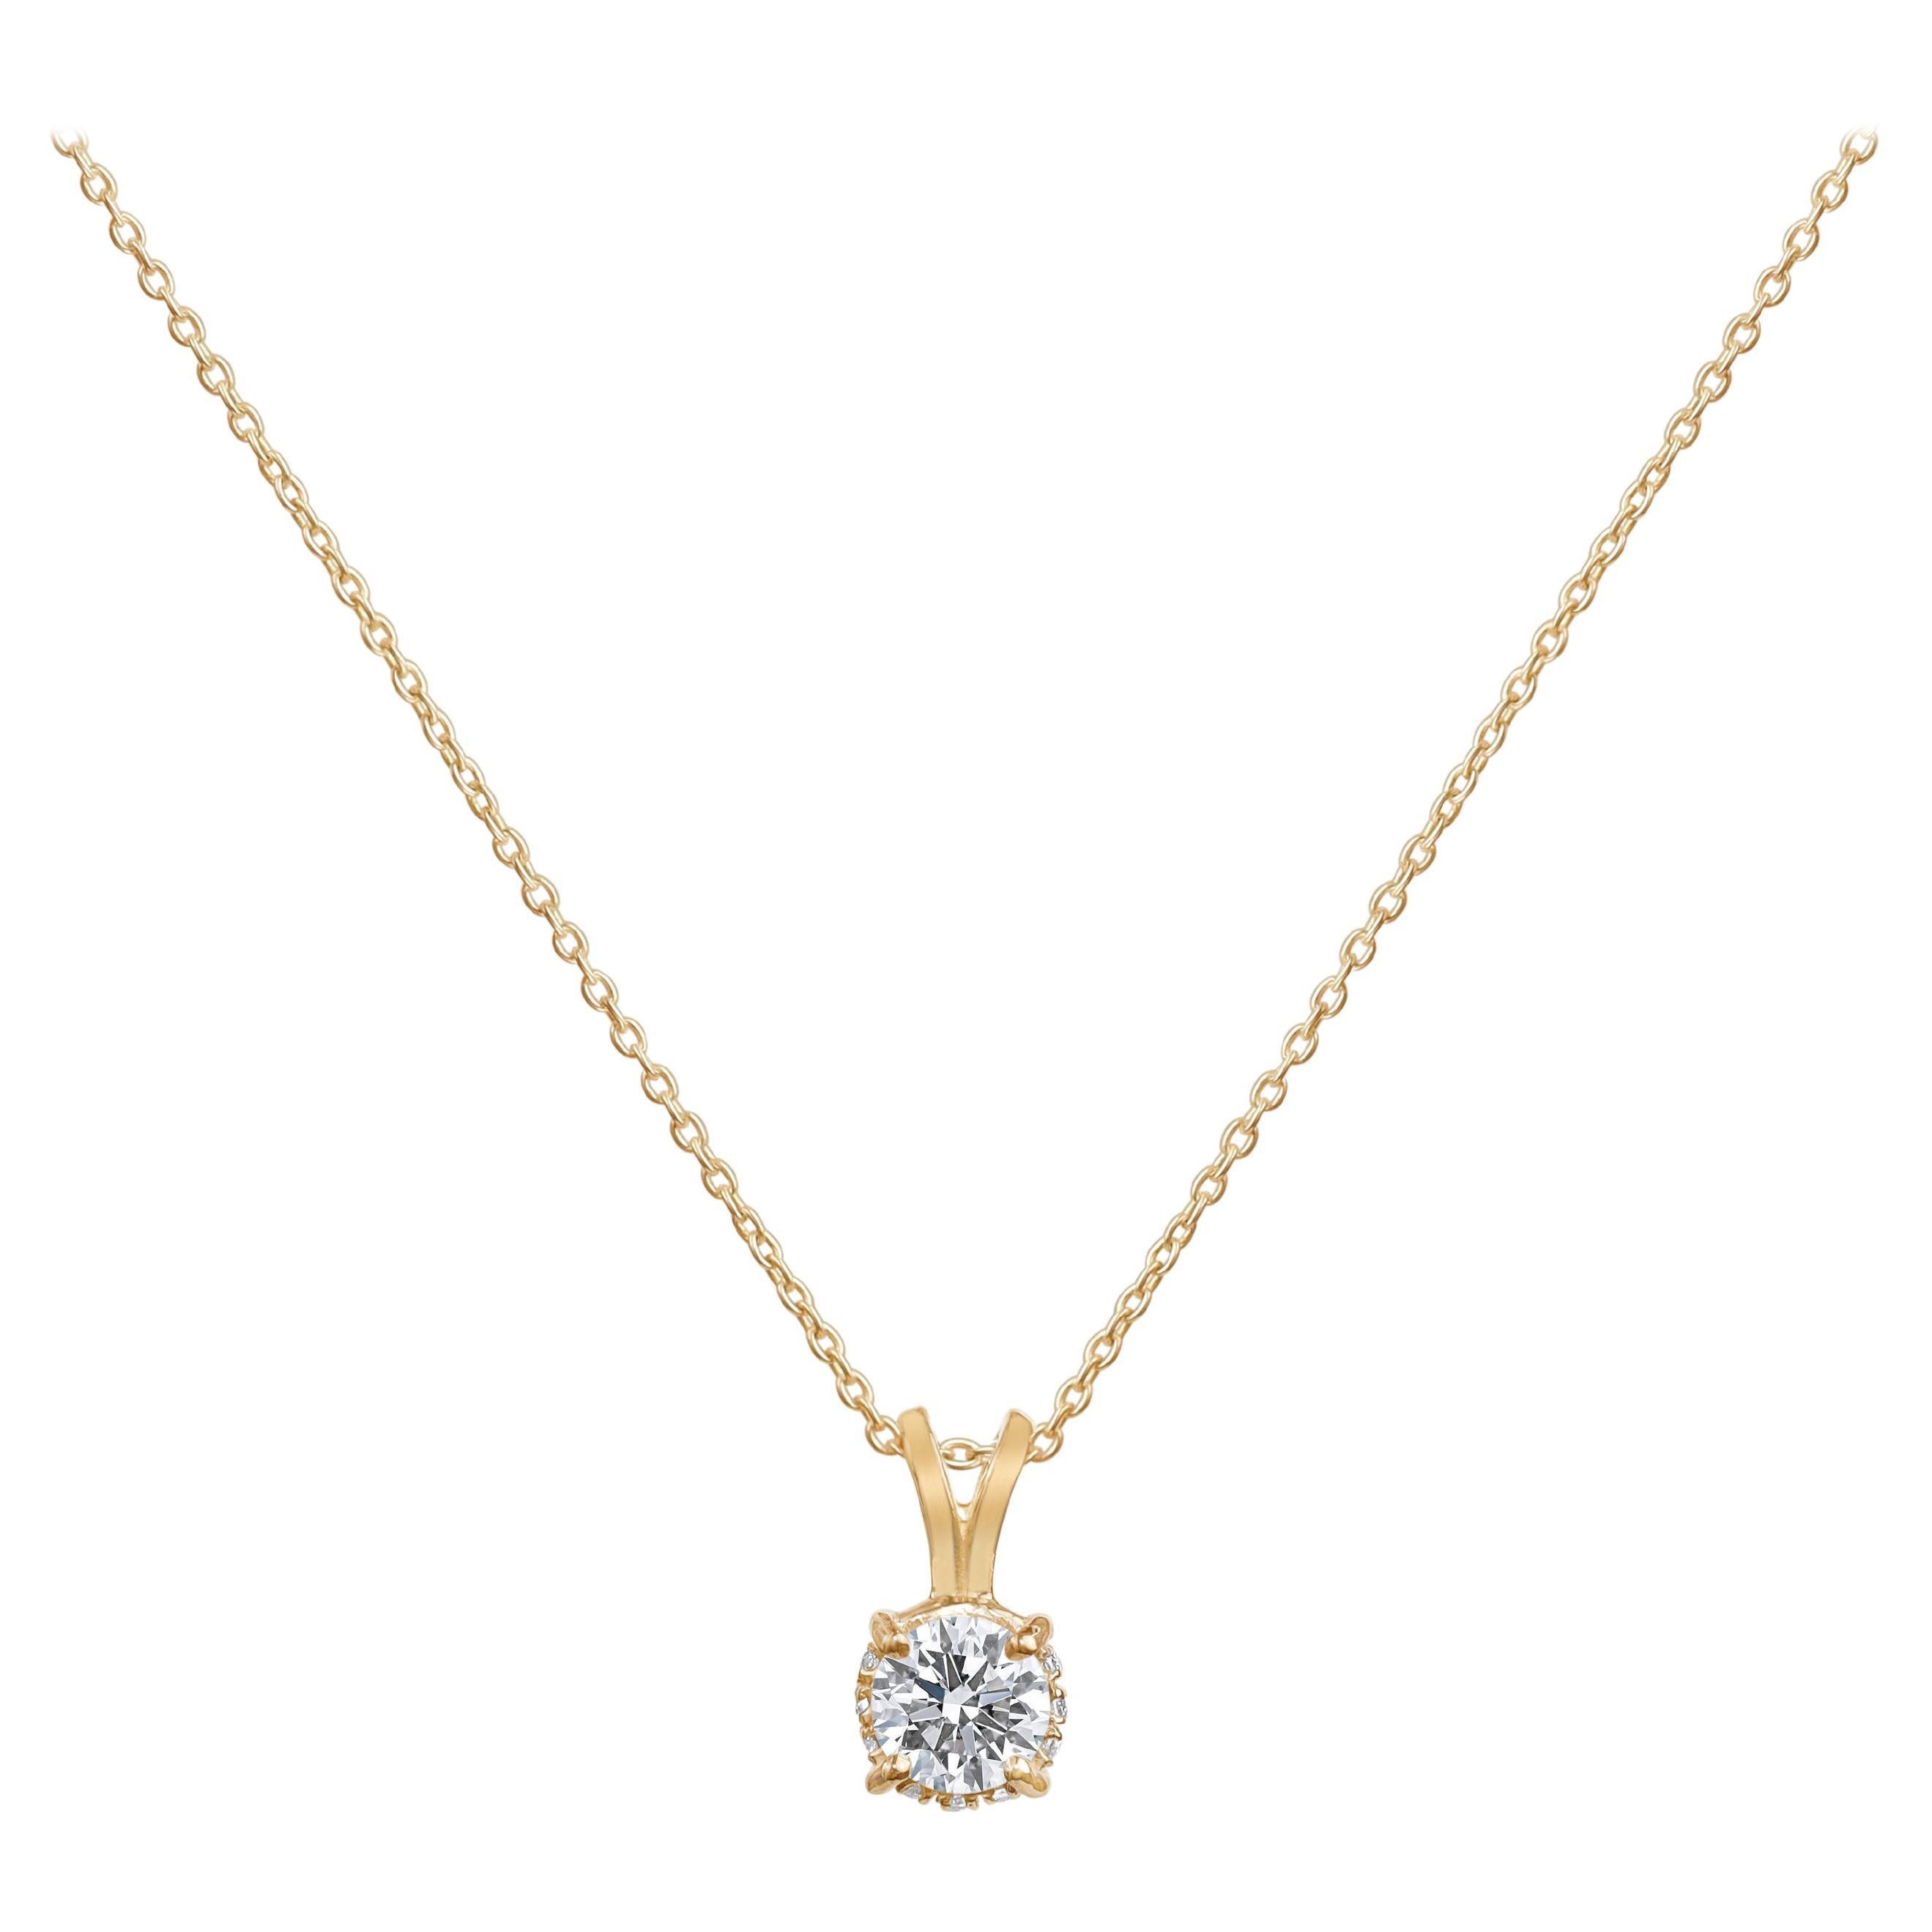 GIA Report Certified 1.5 Carat D Colorless IF Round Cut Diamond Pendant Necklace